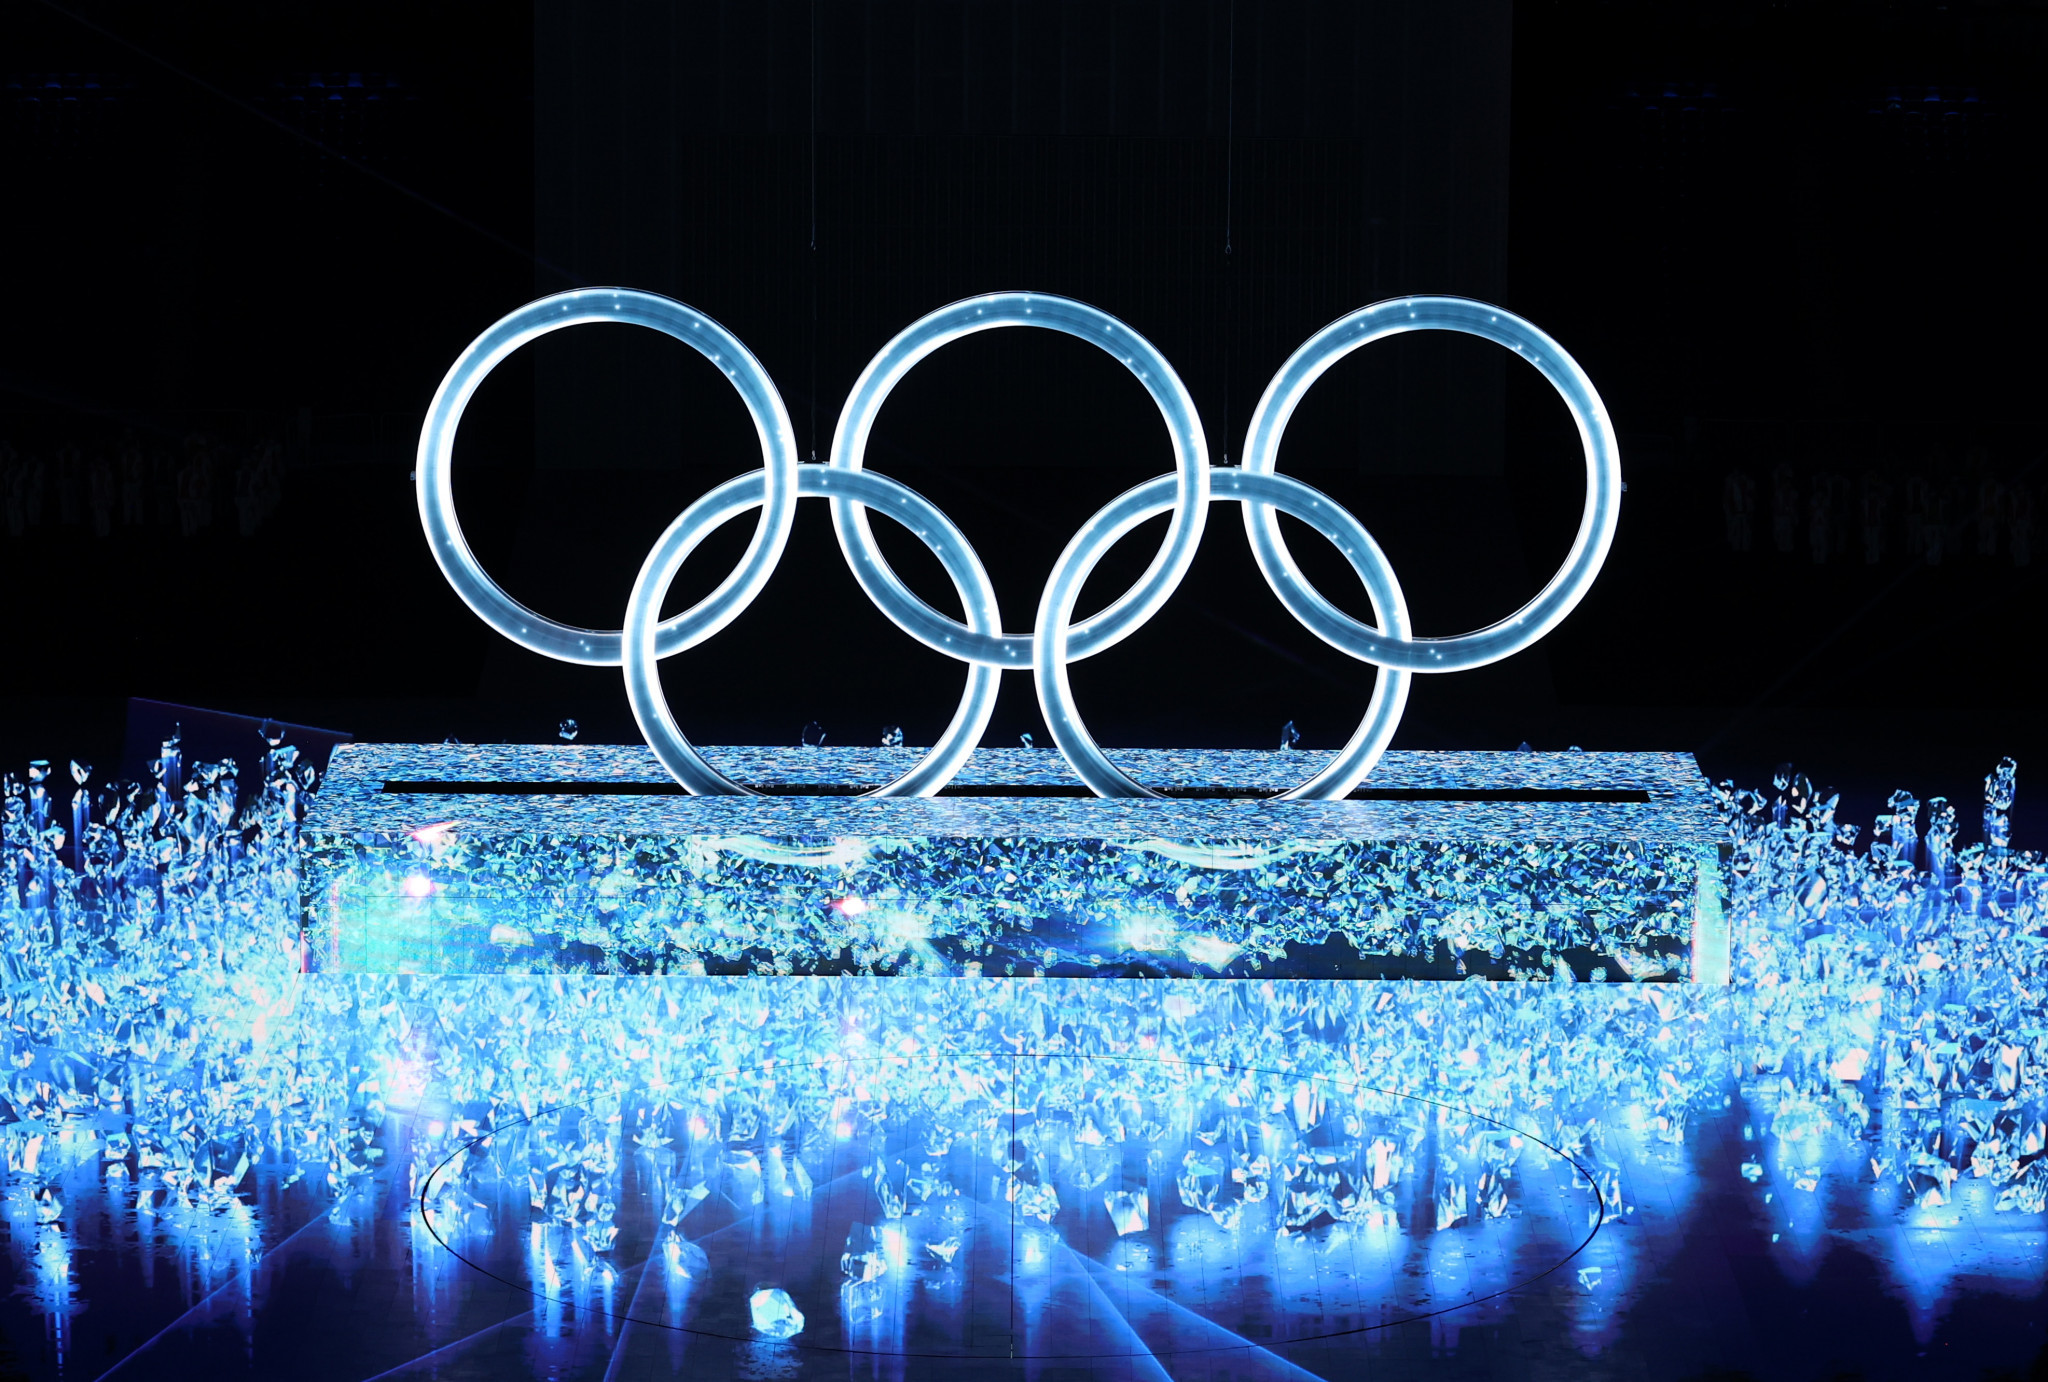 The Olympic Rings being formed with ice was one of the more striking moments of the Beijing 2022 Opening Ceremony ©Getty Images 